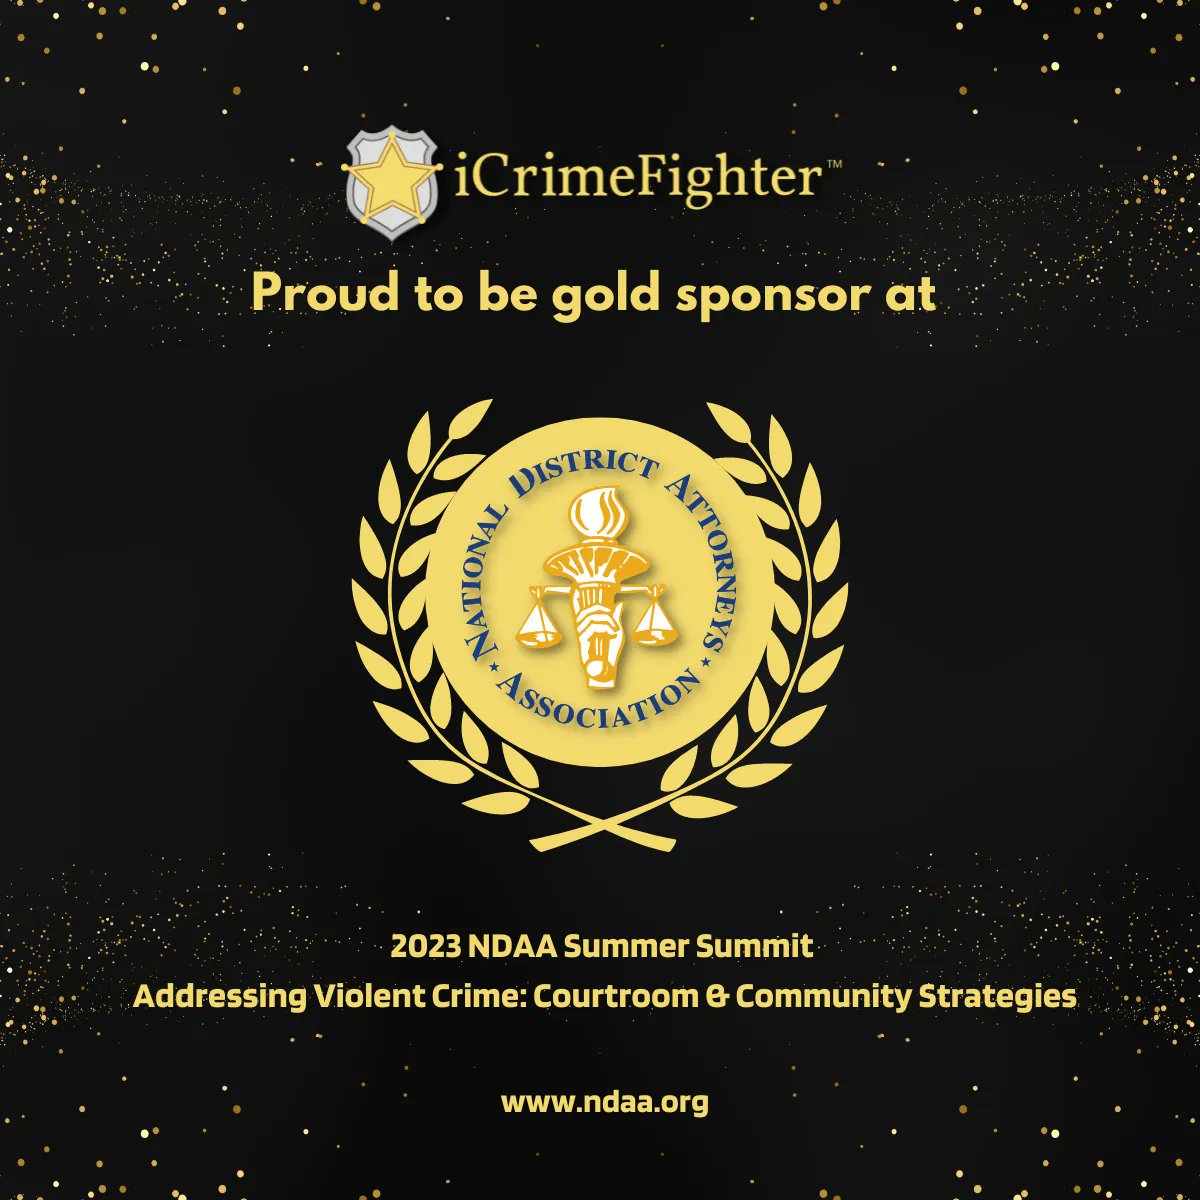 📣 Exciting News! 🌟 iCrimeFighter is thrilled to announce that we are proudly serving as the Gold sponsor for the highly anticipated 2023 NDAA Summer Summit! 🥇💼 #iCrimeFighter #NDAA2023 #GoldSponsor #CrimePrevention #LawEnforcementTechnology